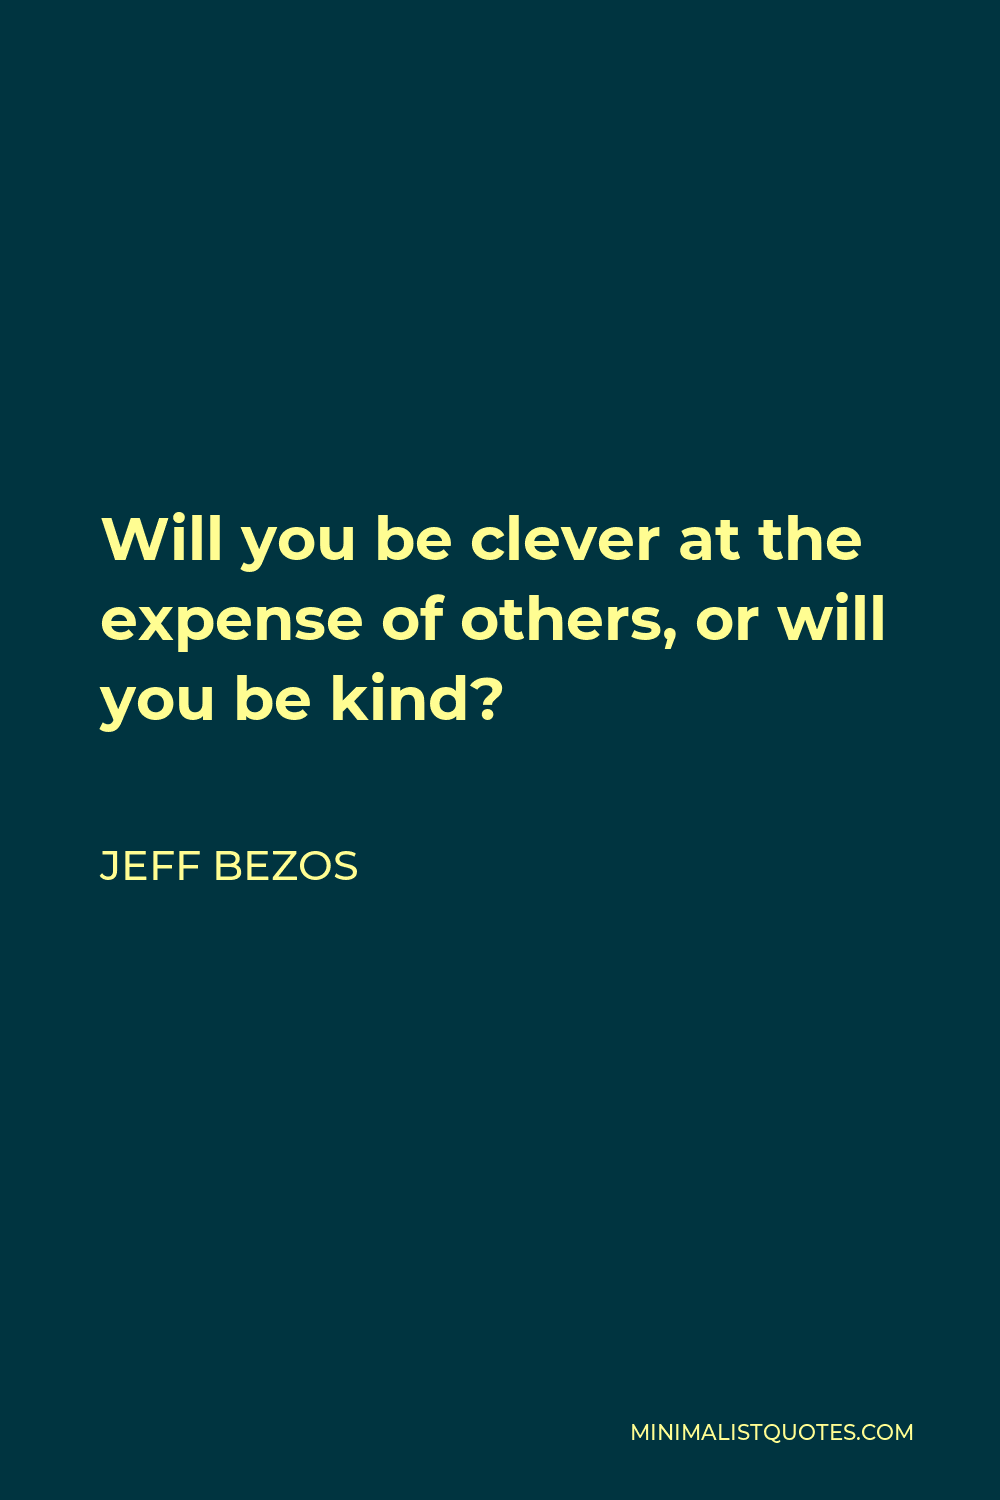 Jeff Bezos Quote - Will you be clever at the expense of others, or will you be kind?